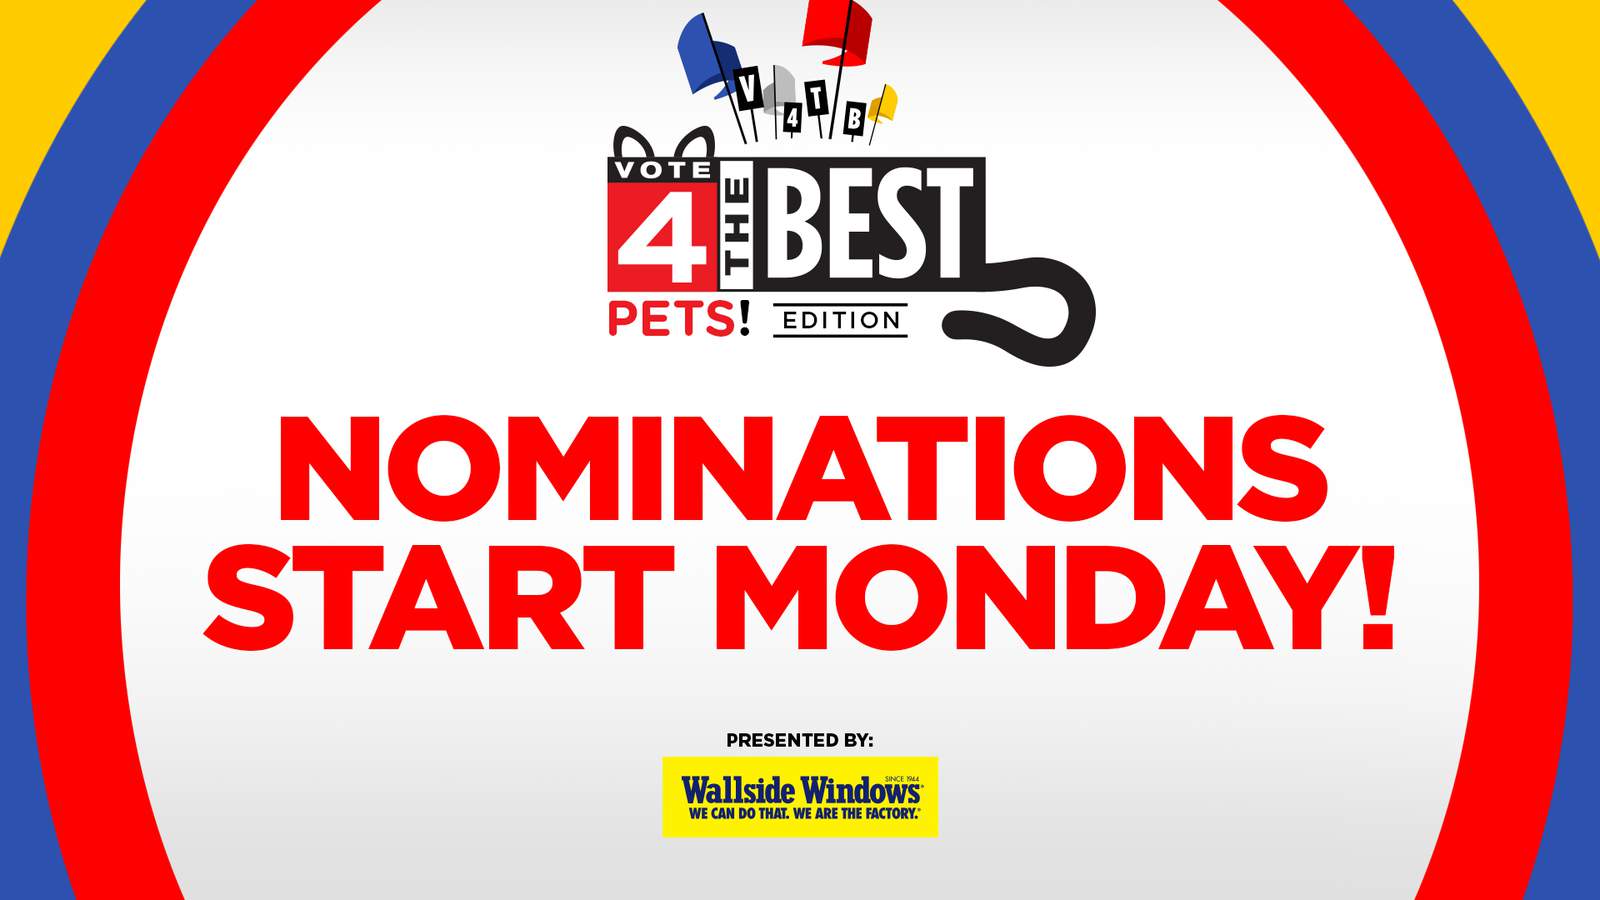 Vote 4 the Best Pets Edition starts Monday!